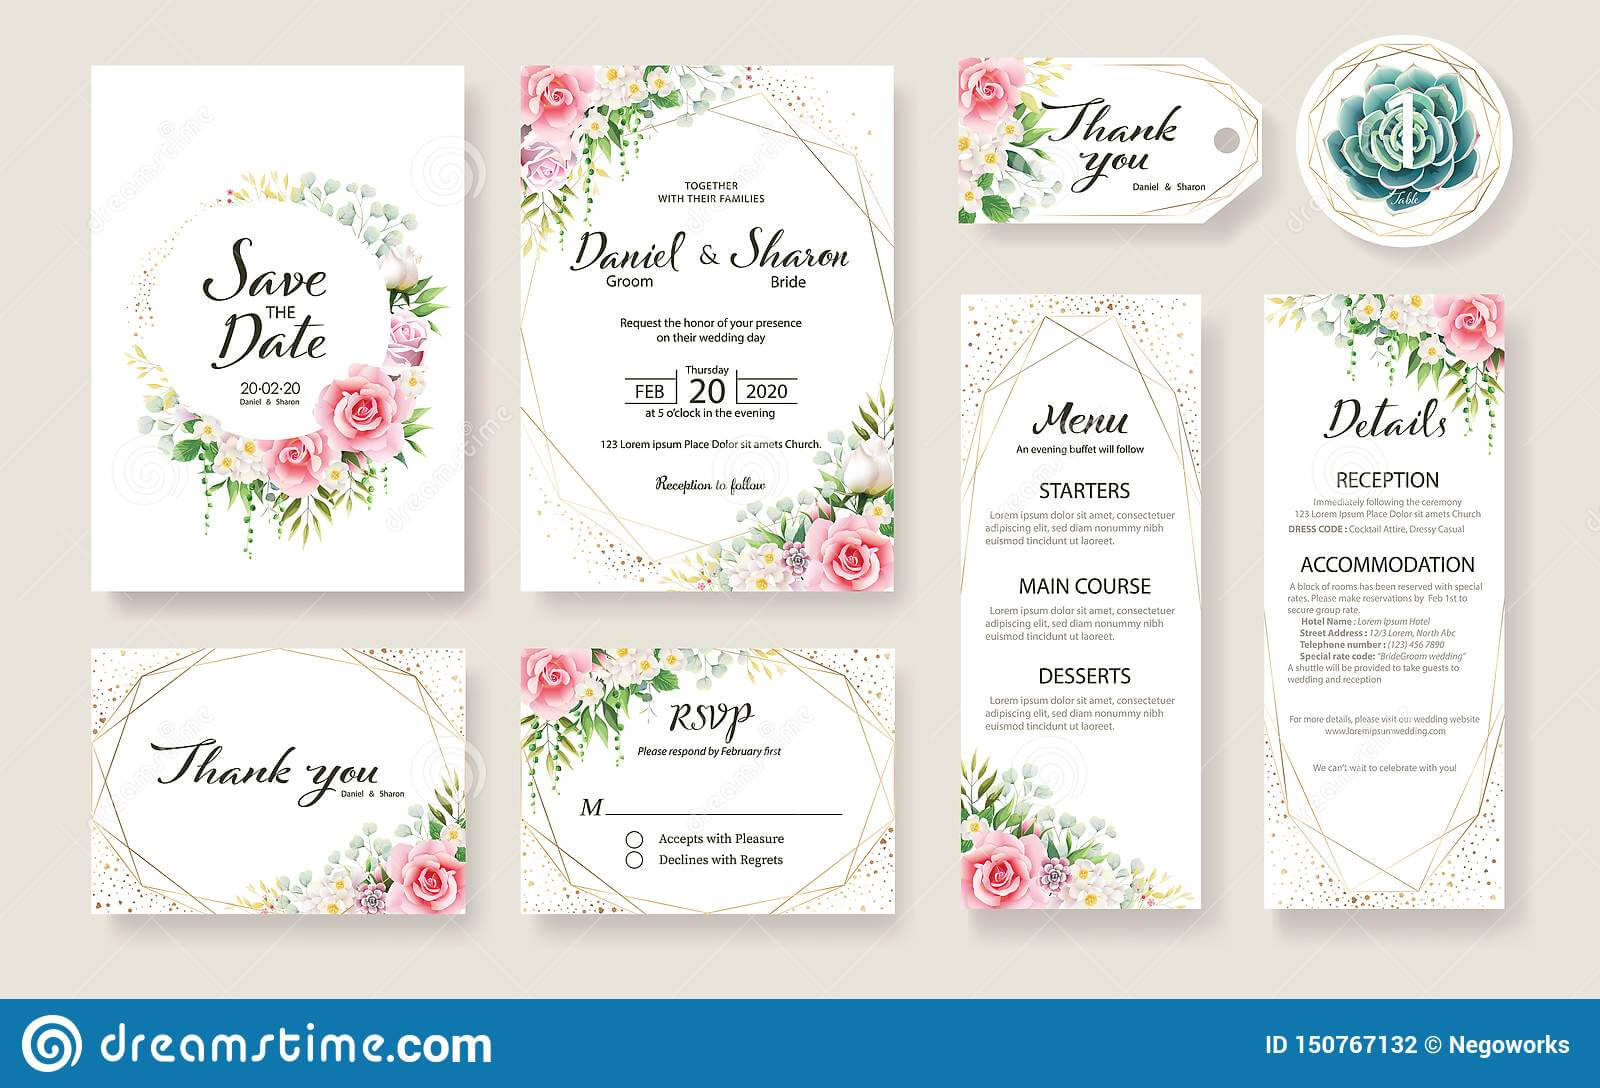 Floral Wedding Invitation Card, Save The Date, Thank You Regarding Table Reservation Card Template